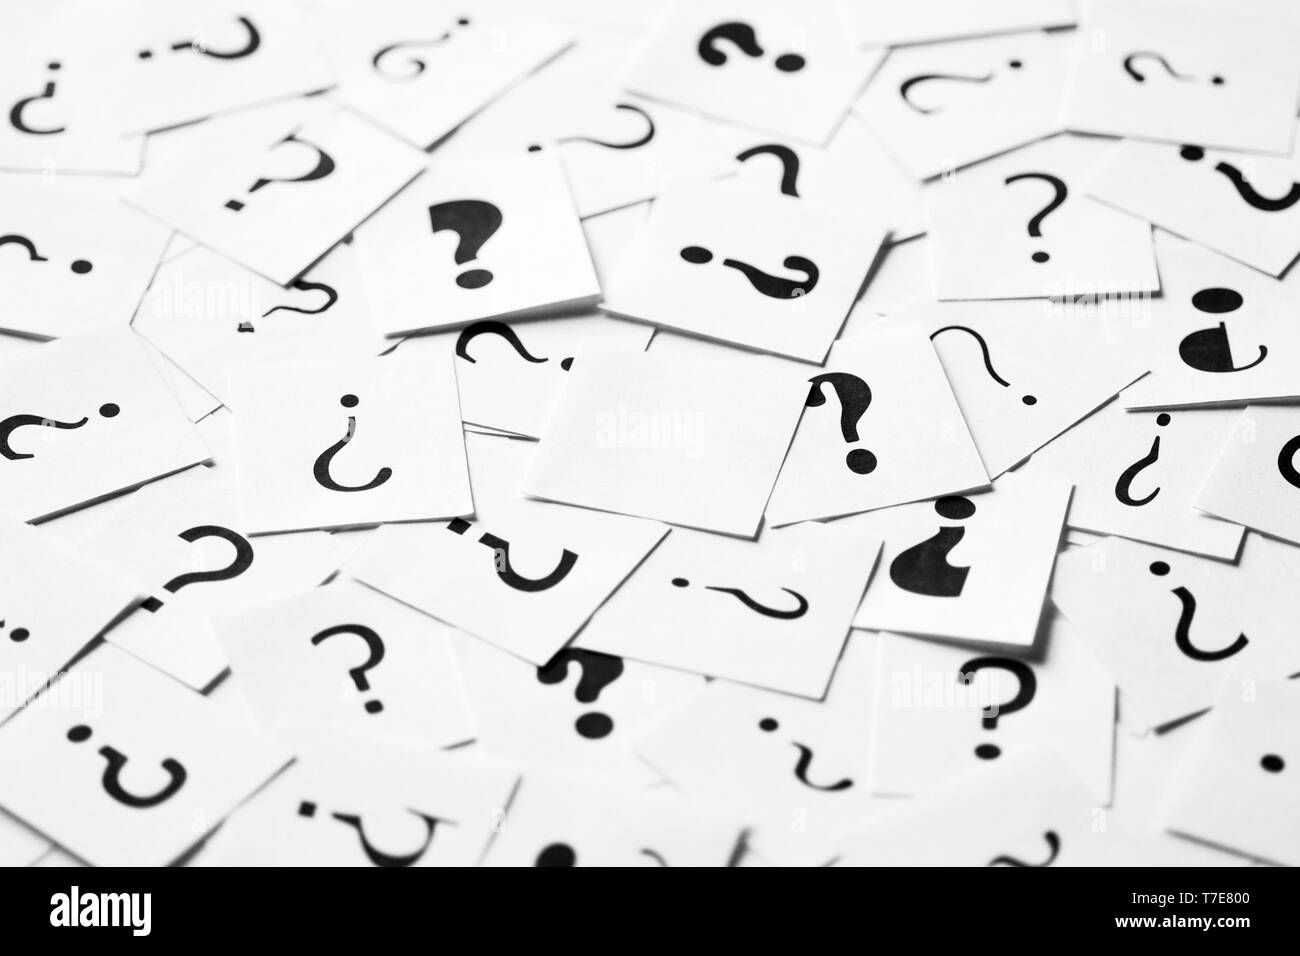 Pile of question mark signs scattered around with empty one in the center. Decision, enquiry or faq concept. Stock Photo